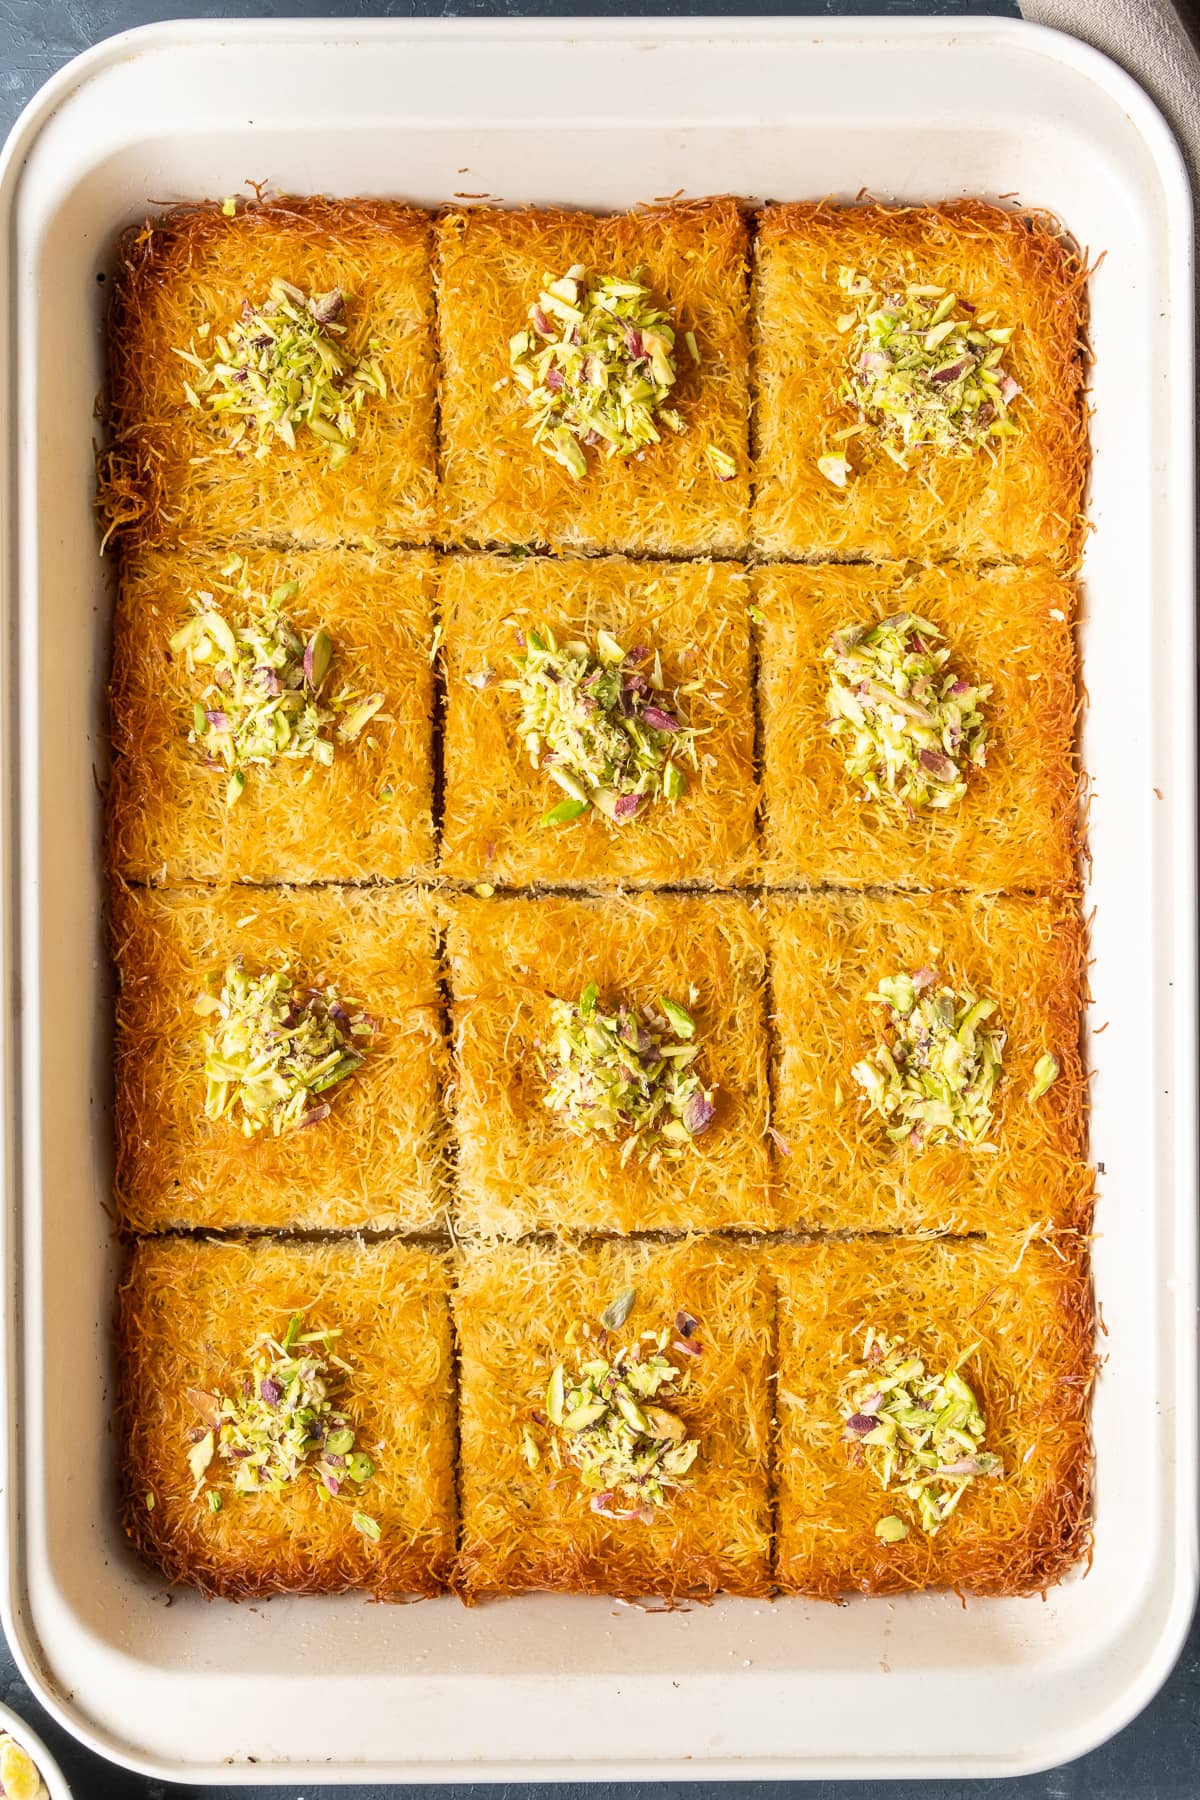 Golden and crispy kadaif dessert sliced in squares and topped with crumbled pistachios in a rectangular pan.